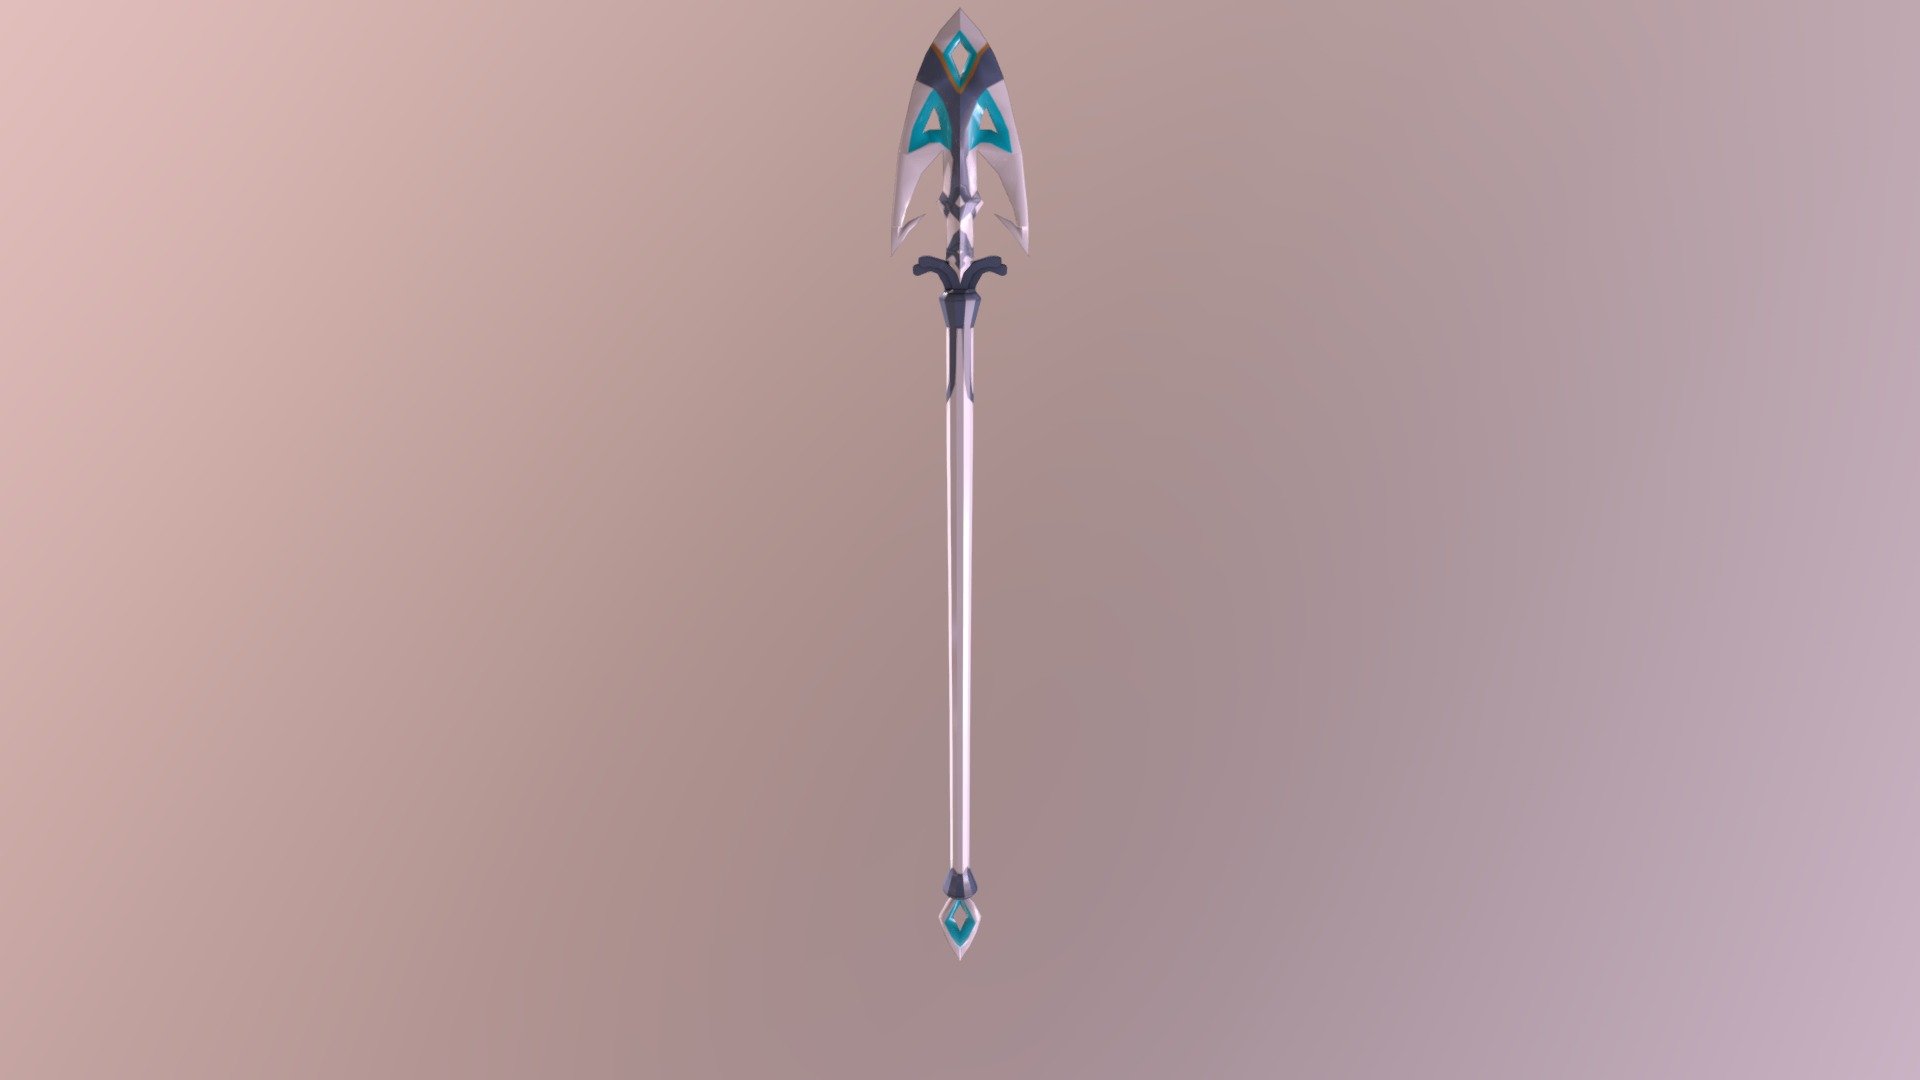 A model of the zora spear from The Legend of Zelda: Breath of the Wild with a custom texture. Made for my 3D modelling class at RIT 3d model